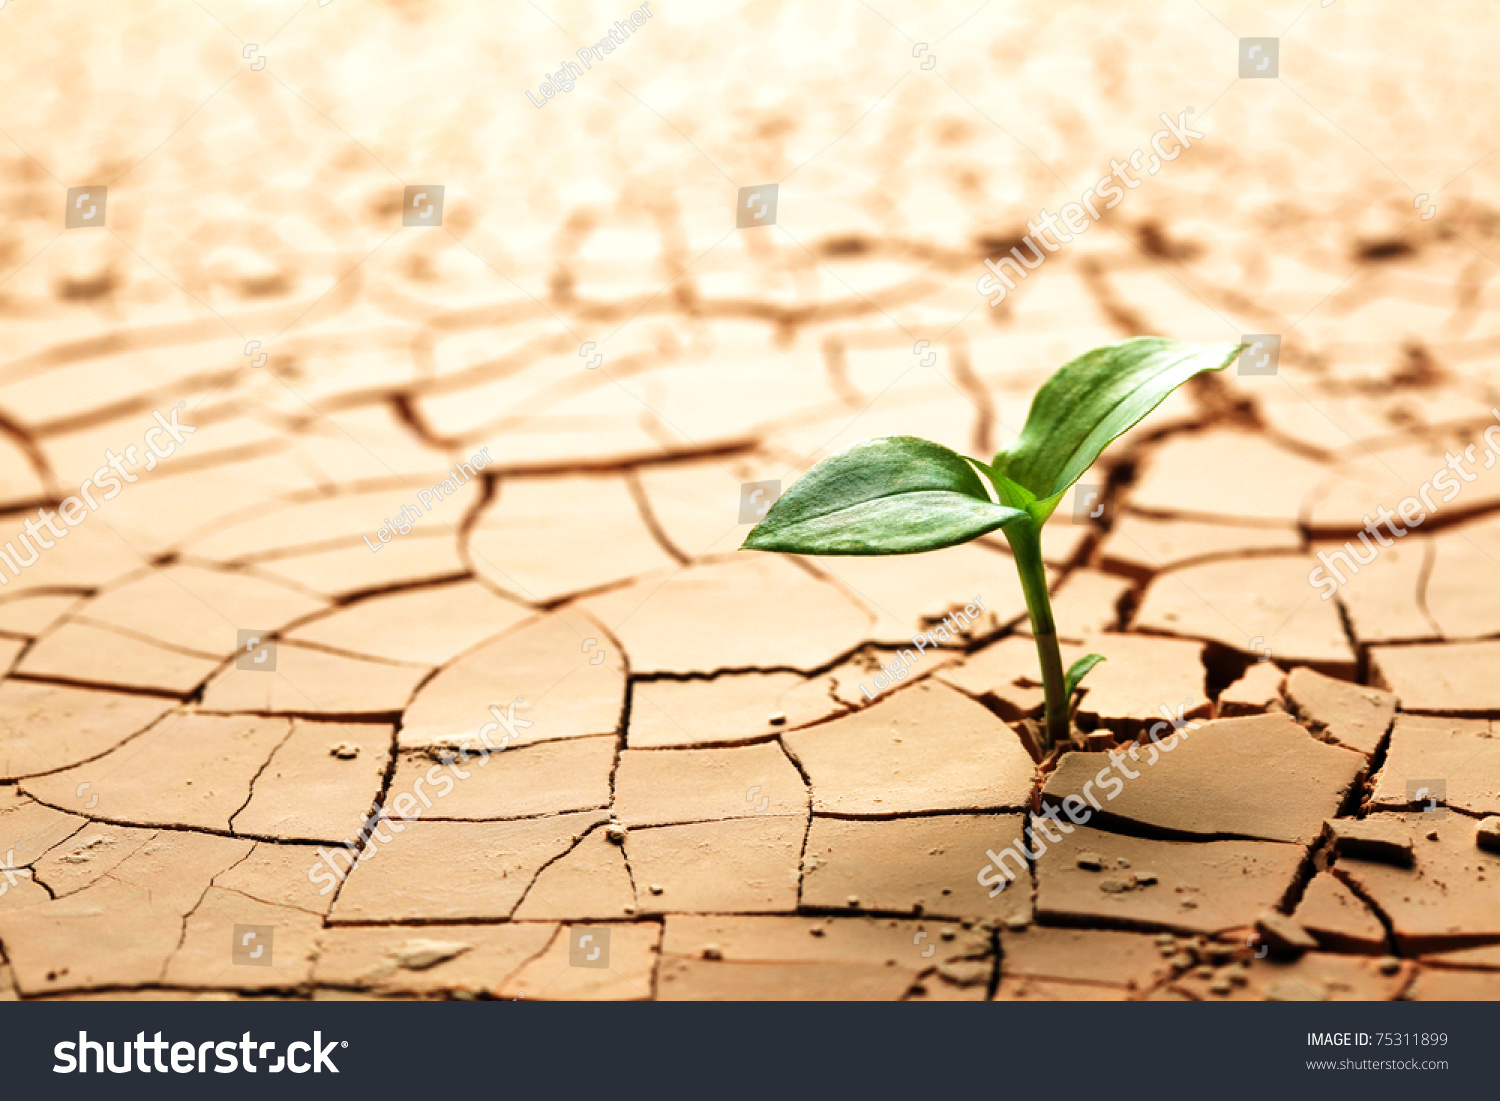 Plant in dried cracked mud #75311899